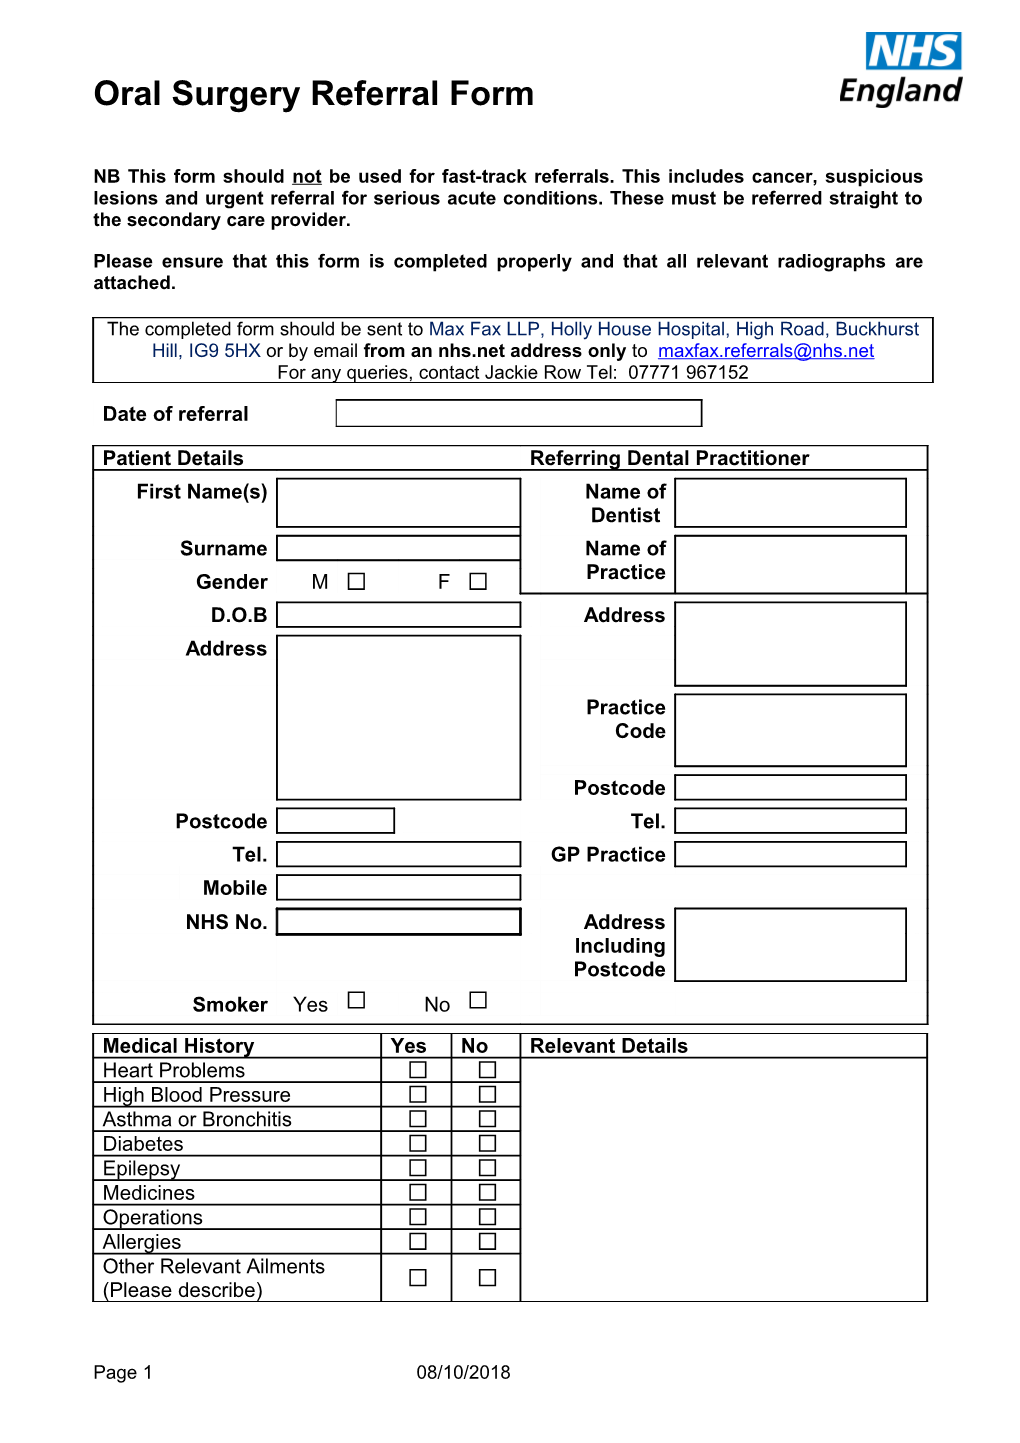 Oral Surgery Referral Form